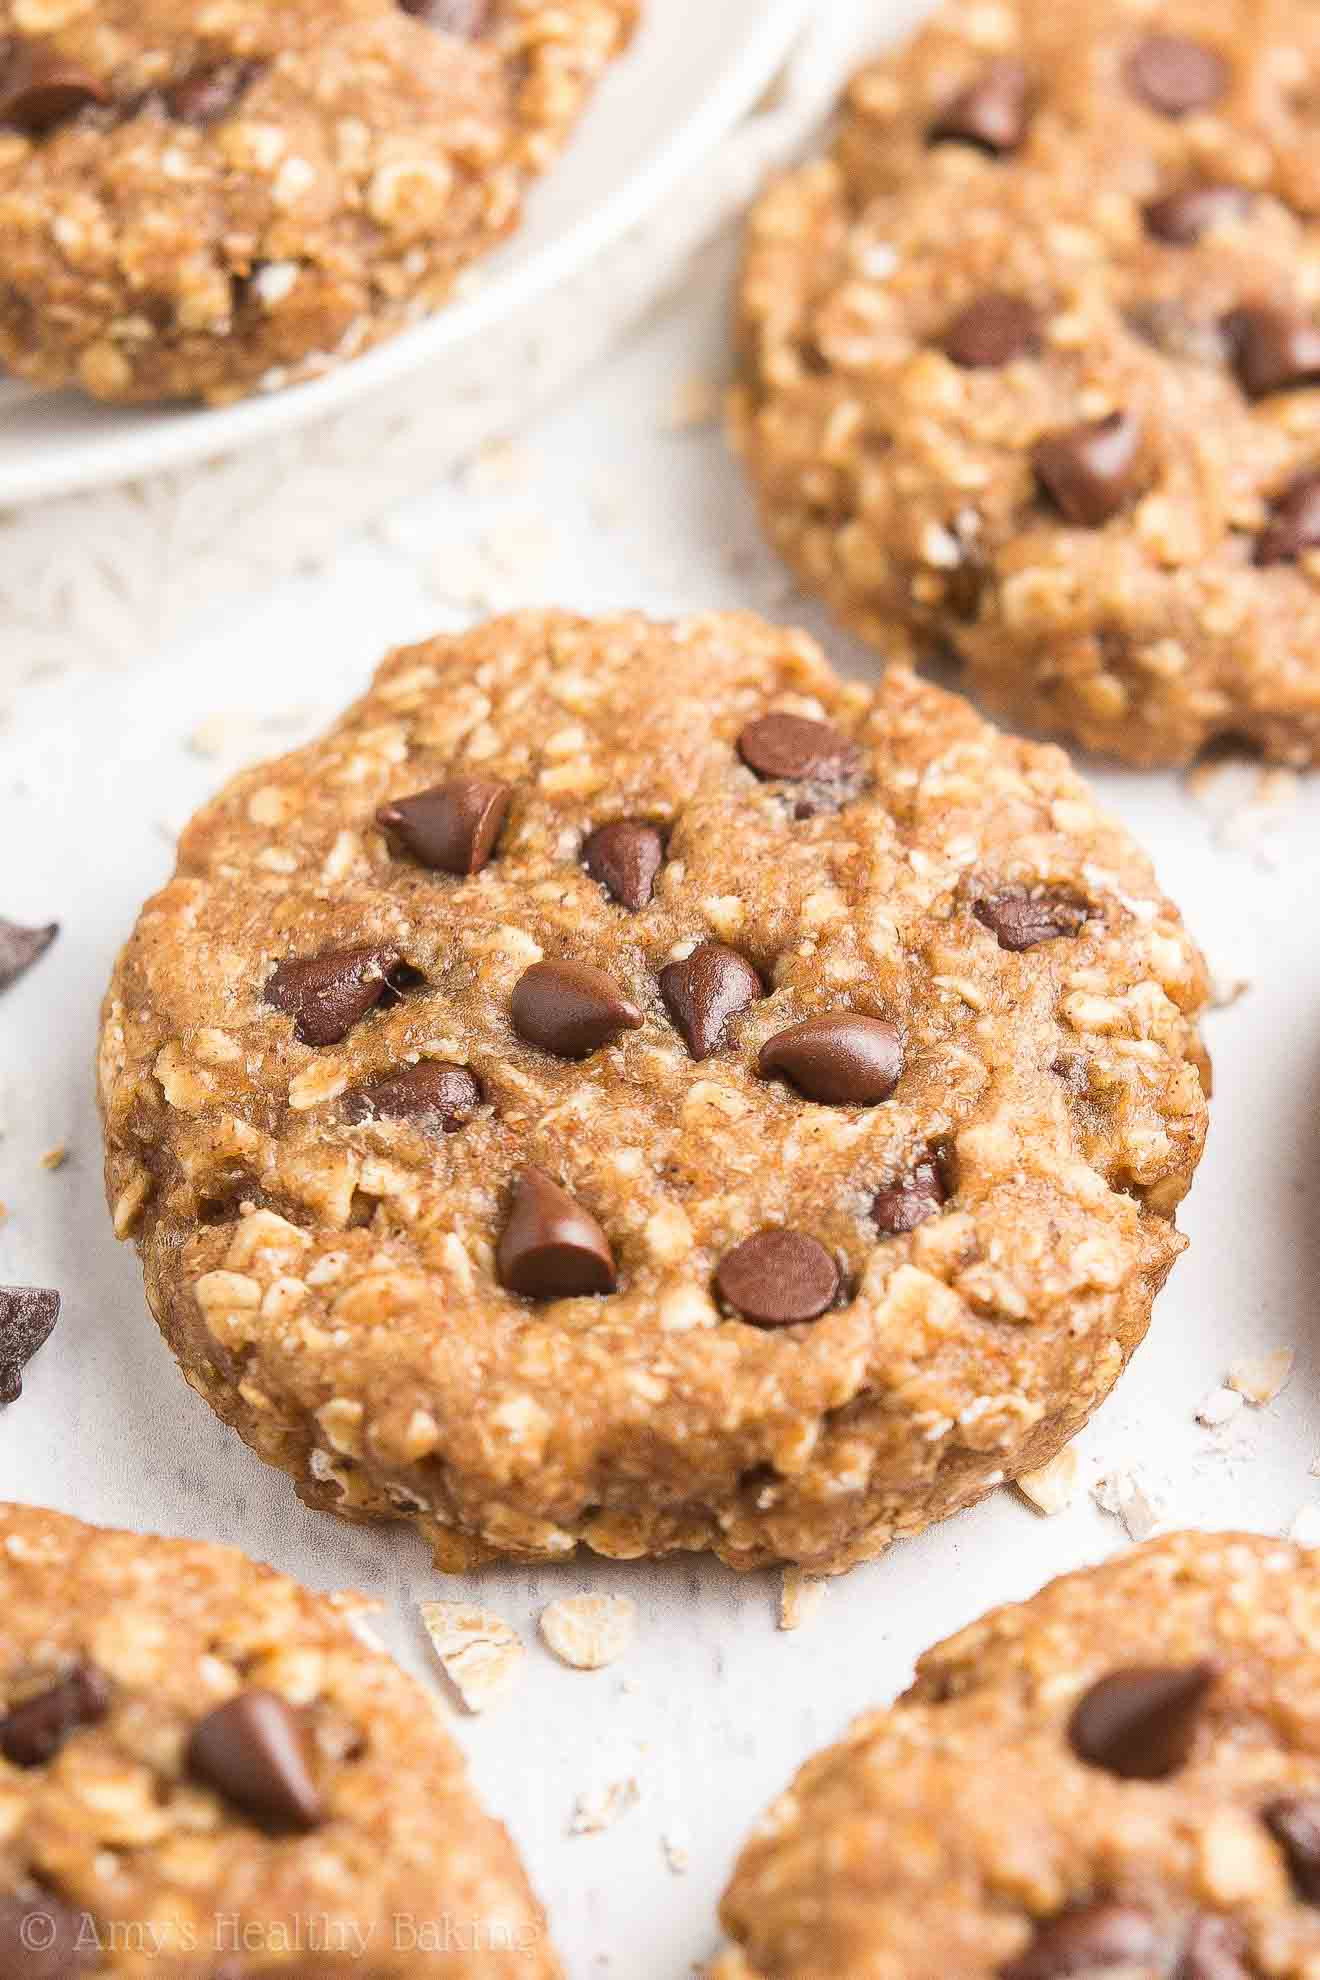 Oatmeal Peanut Butter Cookies Healthy
 healthy peanut butter oatmeal cookies